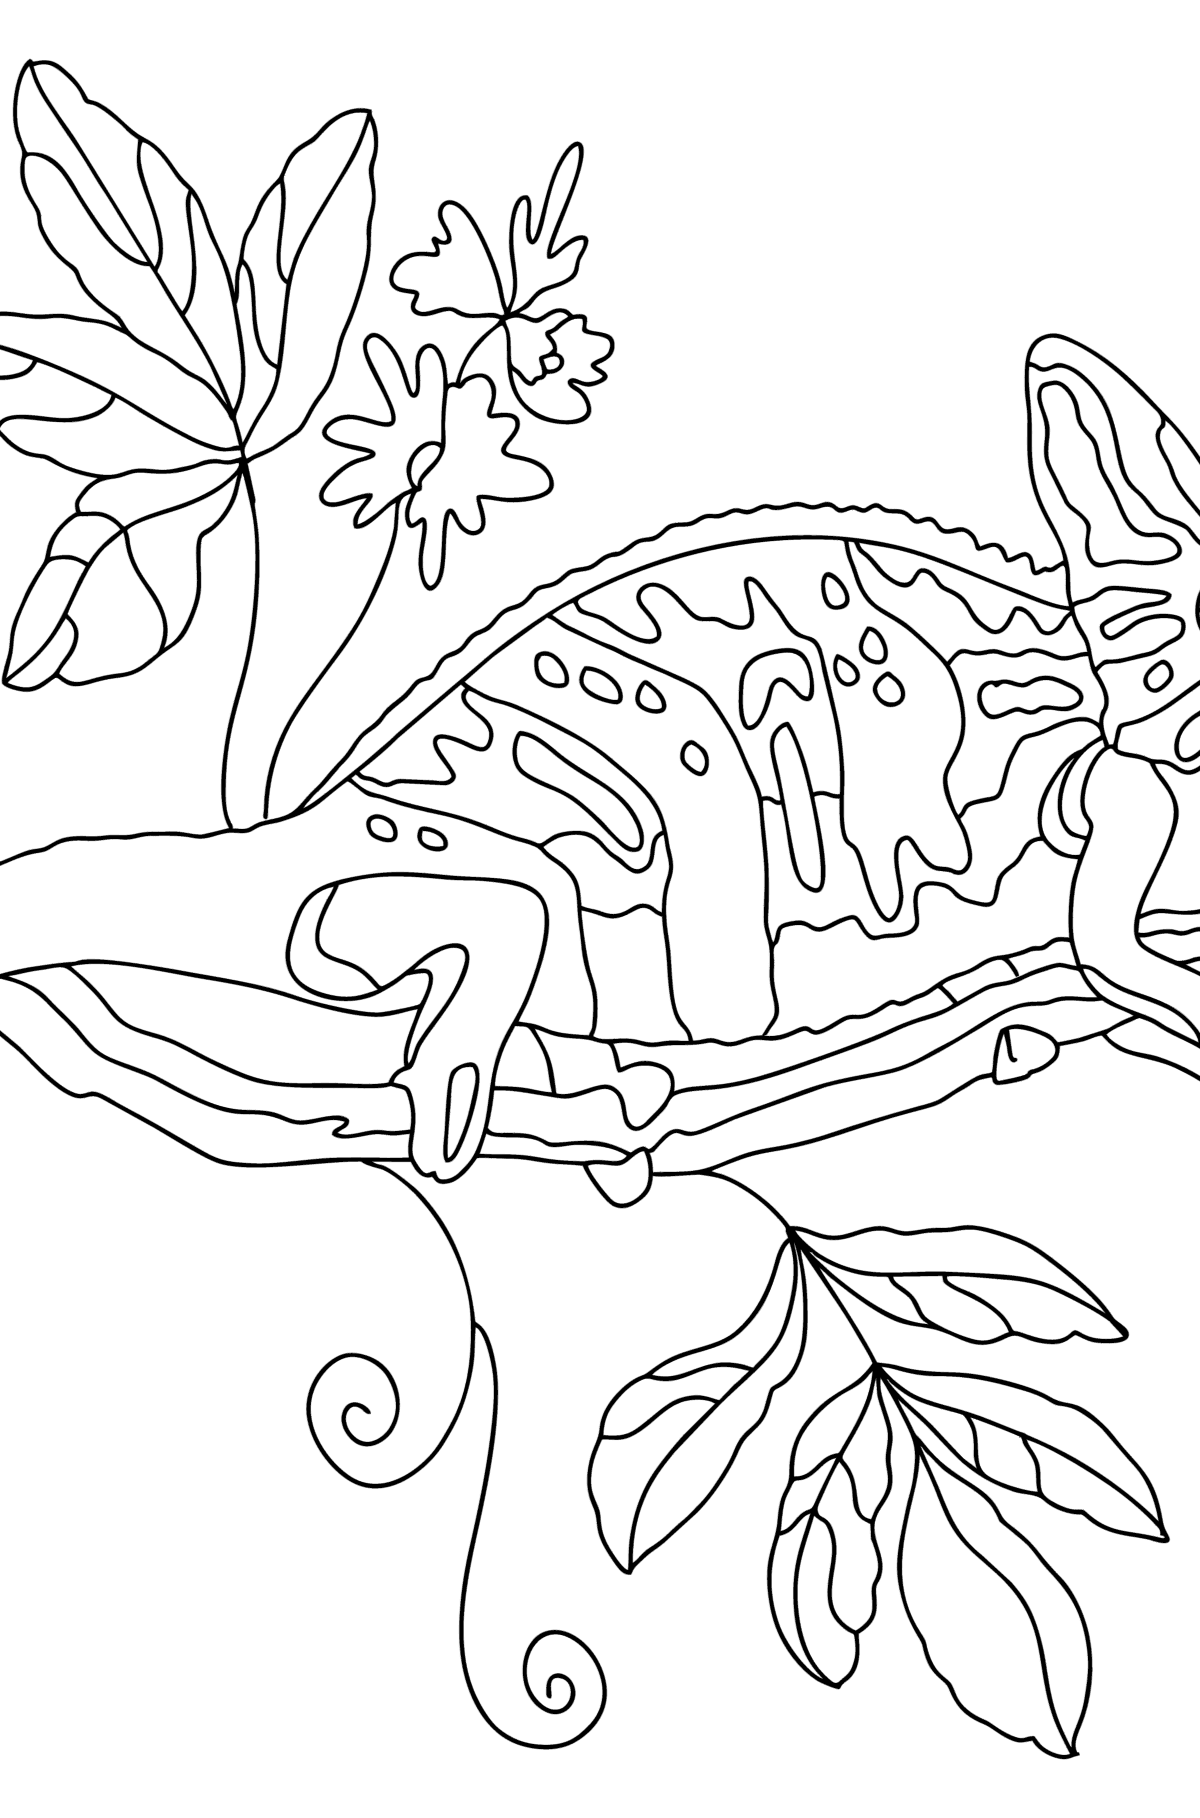 Colorful chameleon - Chameleons coloring pages online and printable